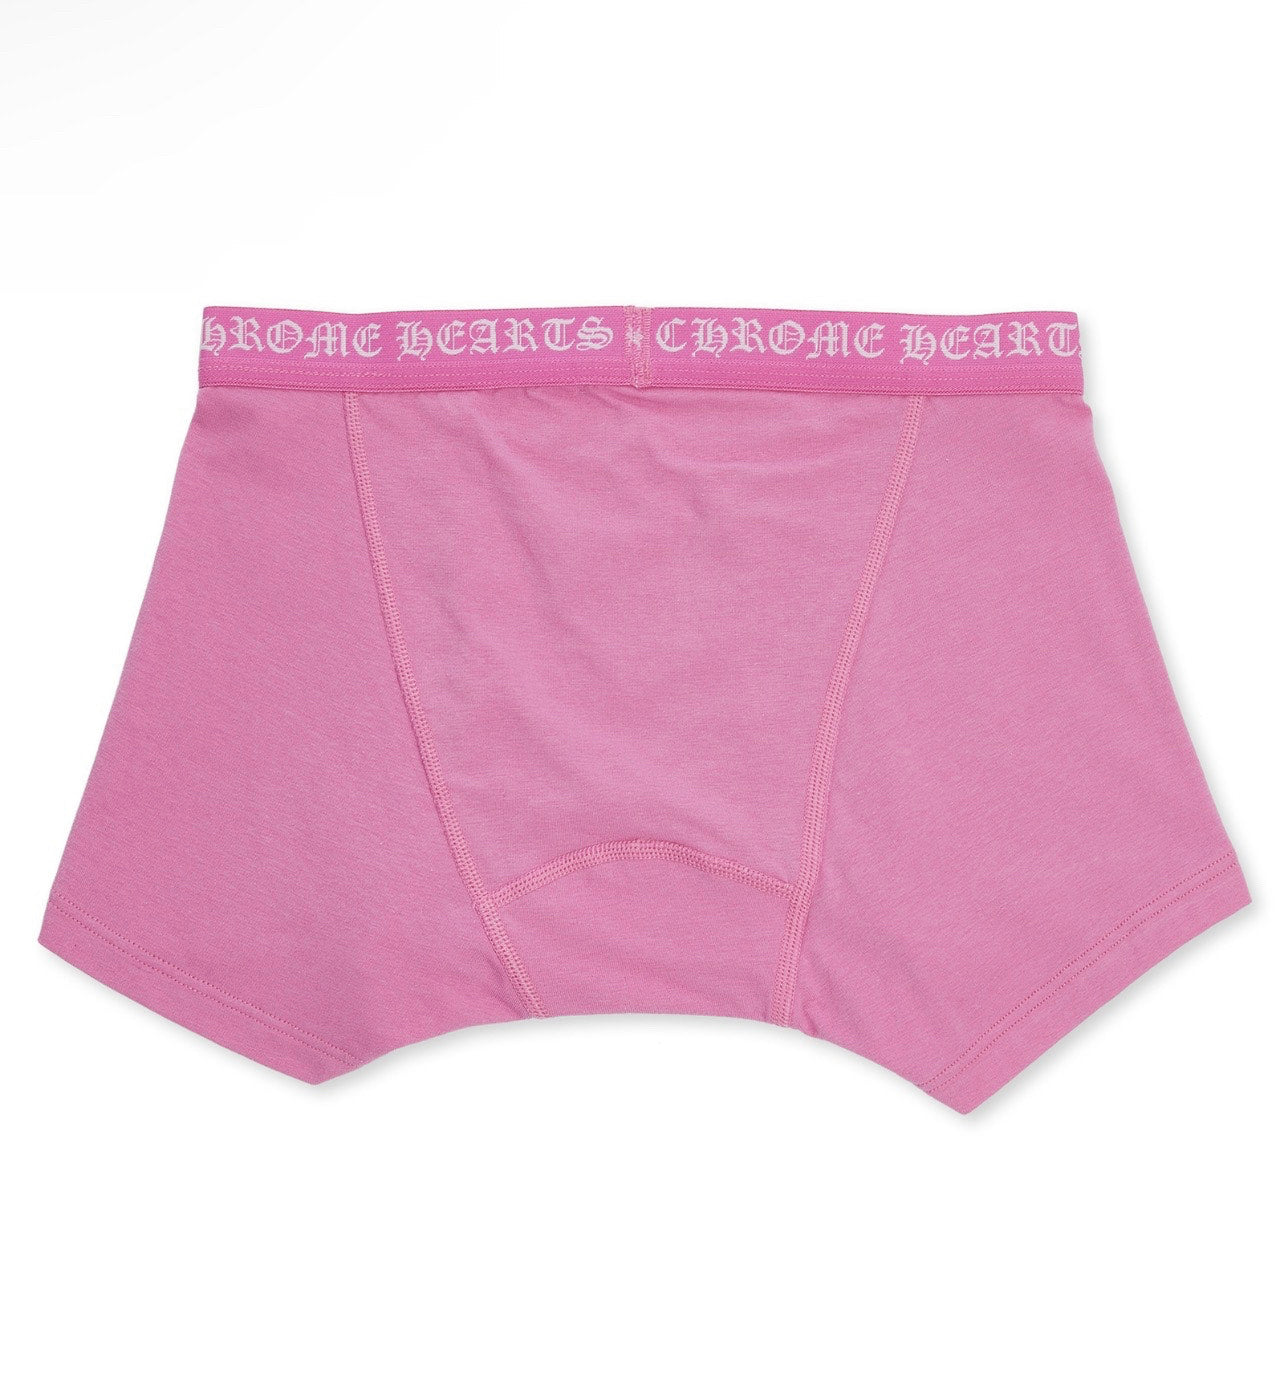 Chrome hearts Boxer Brief Pink